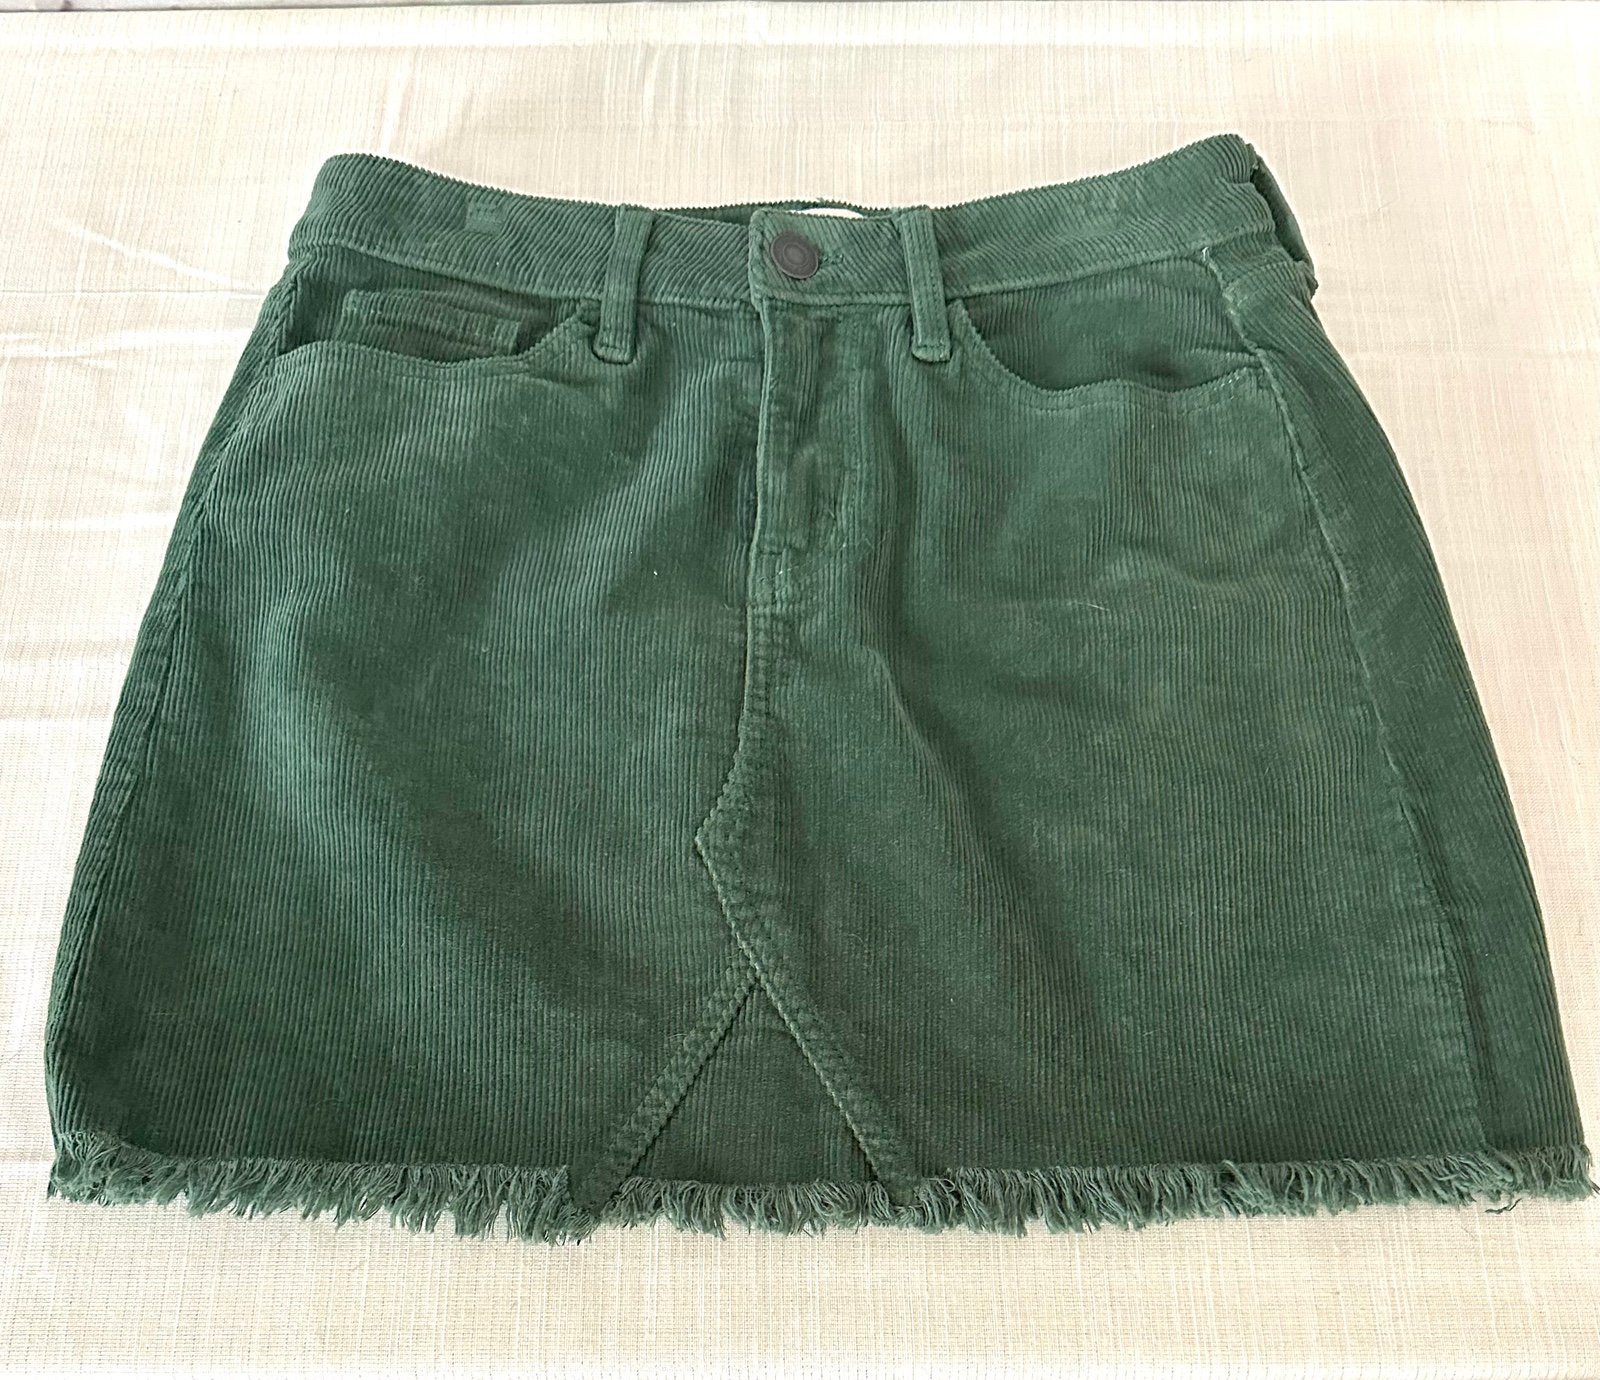 Special offer  Green corduroy skirt size 9 nUZyx98BJ Buying Cheap